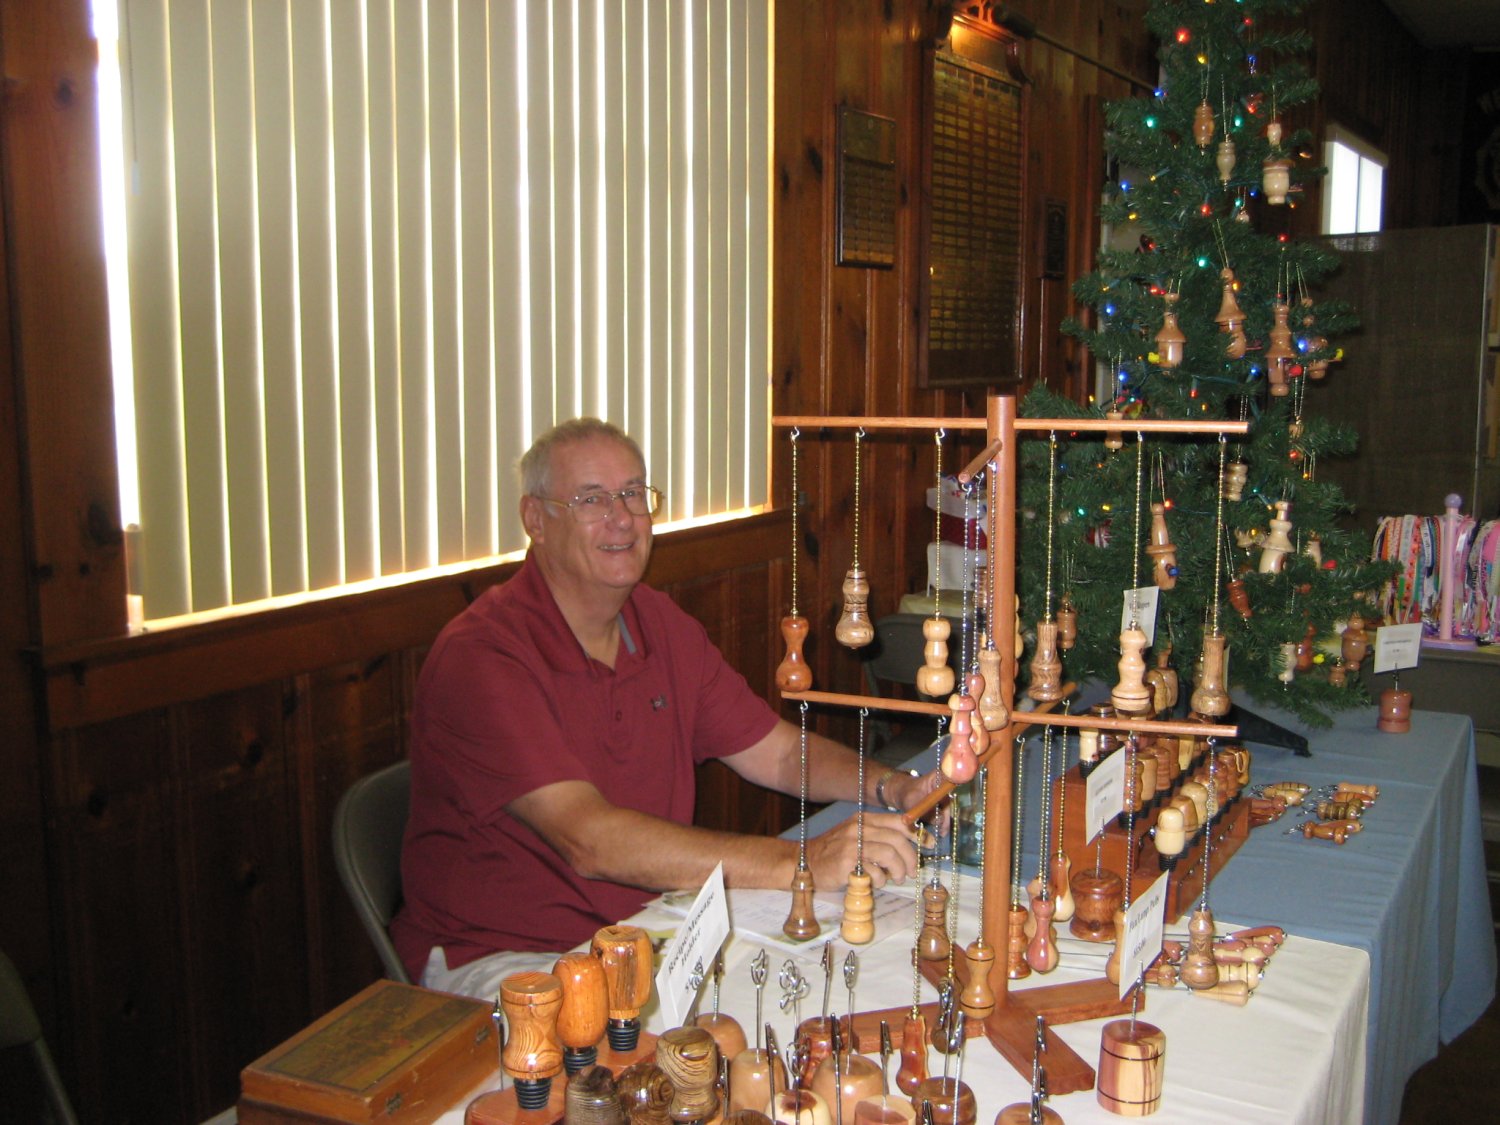  Dave Peterson and his handcrafted wooden bottle stoppers, ornaments, letter openers, etc.  